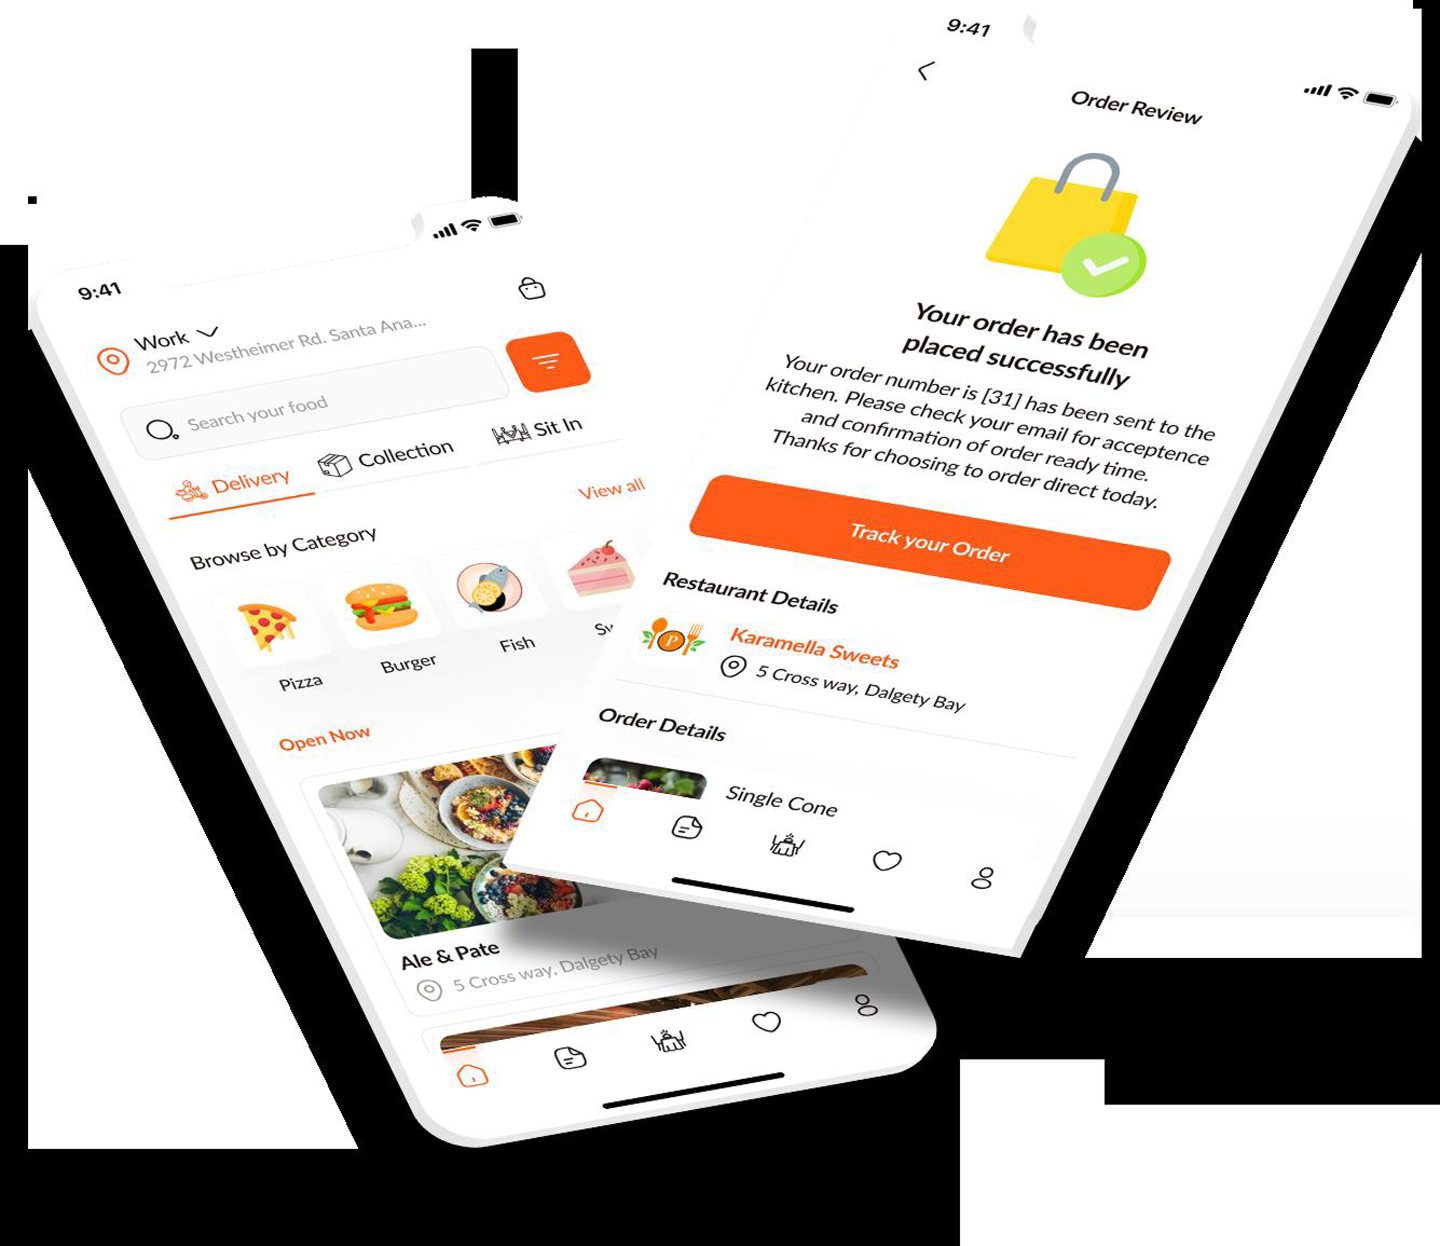 Ordering can happen through What The Fork app or individual business apps.